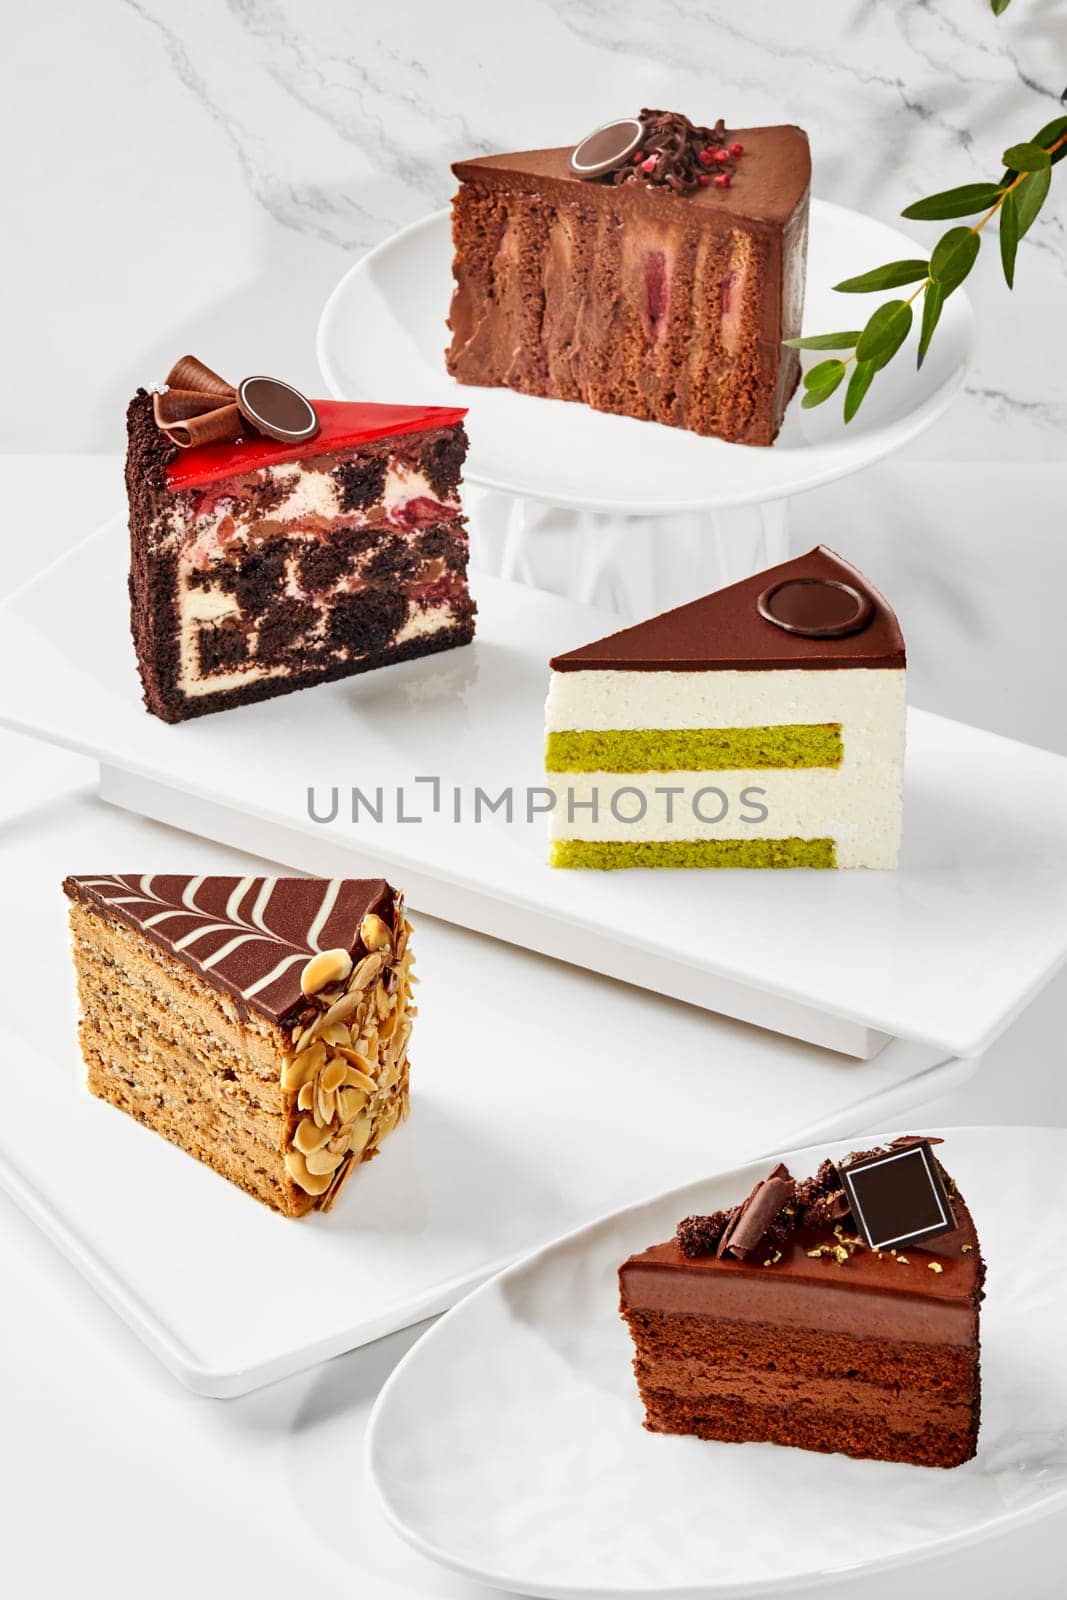 Tempting slices of various cakes with velvety chocolate layers, airy pistachio sponge, creamy mousse, nuts and berries arranged on white plates on marble surface. Patisserie masterpieces